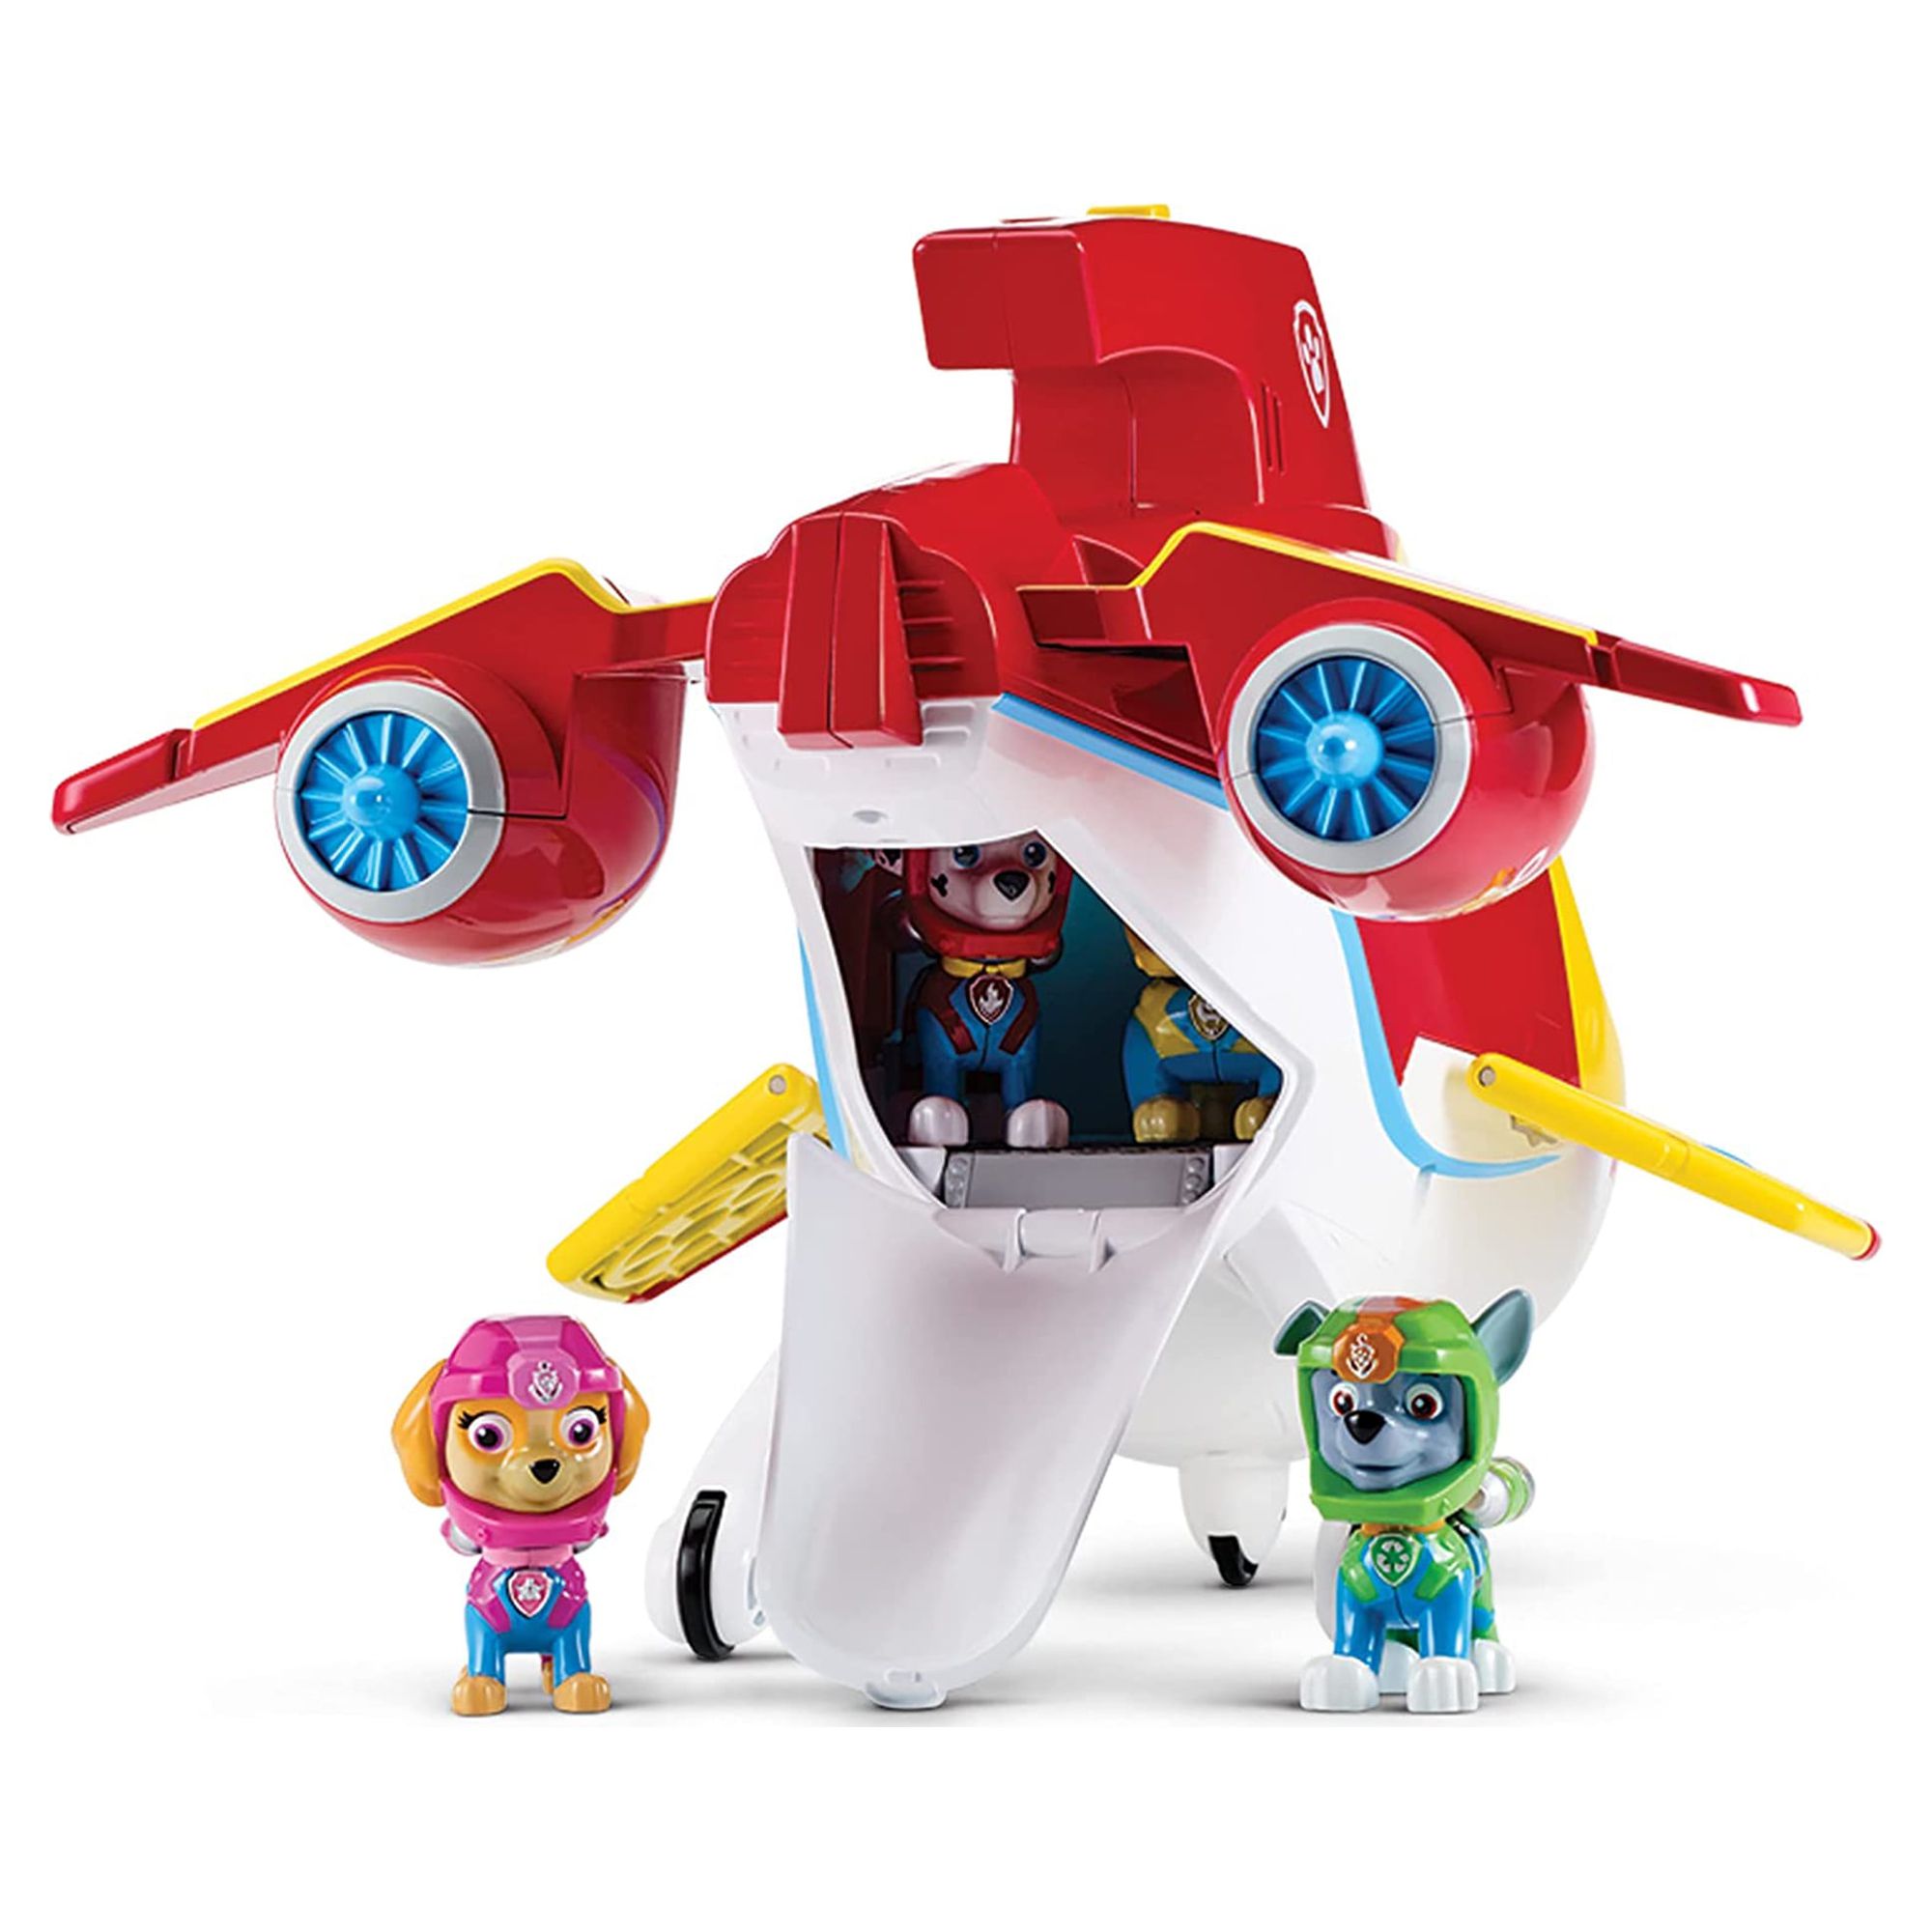 Paw Patrol Sub Patroller Air to Sea Vehicle with Lights, Sounds & Launcher - image 5 of 8